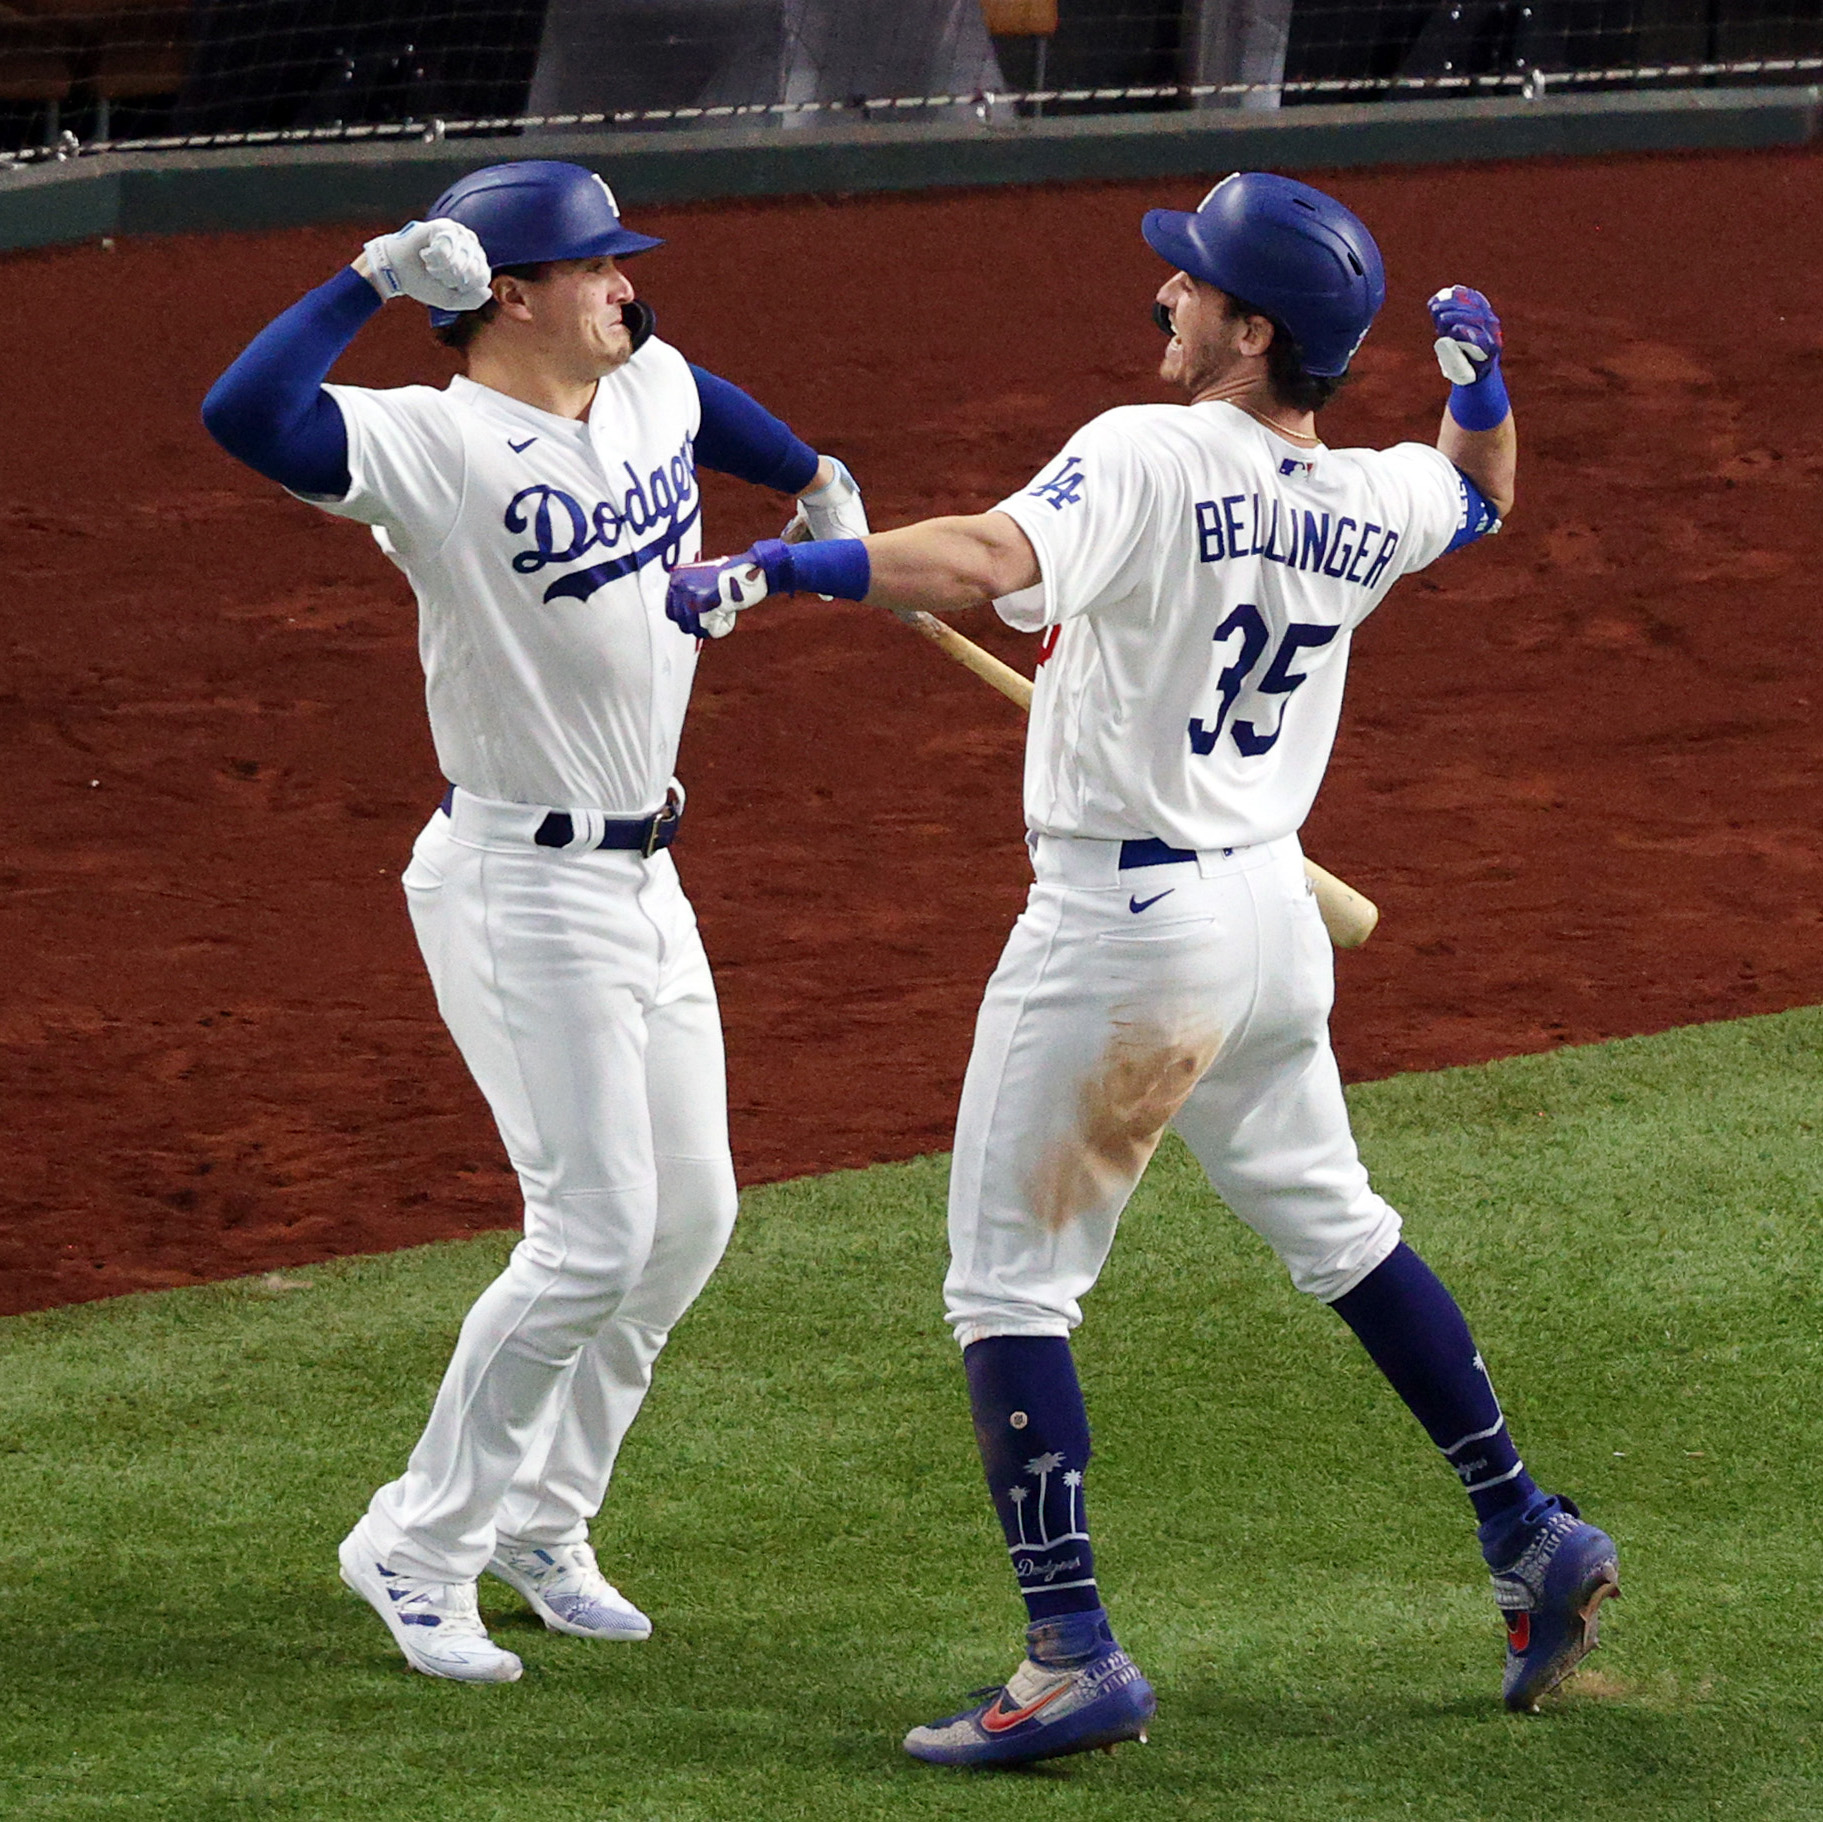 Cody Bellinger Hit Celebration On Basepaths - Marquee Sports Network